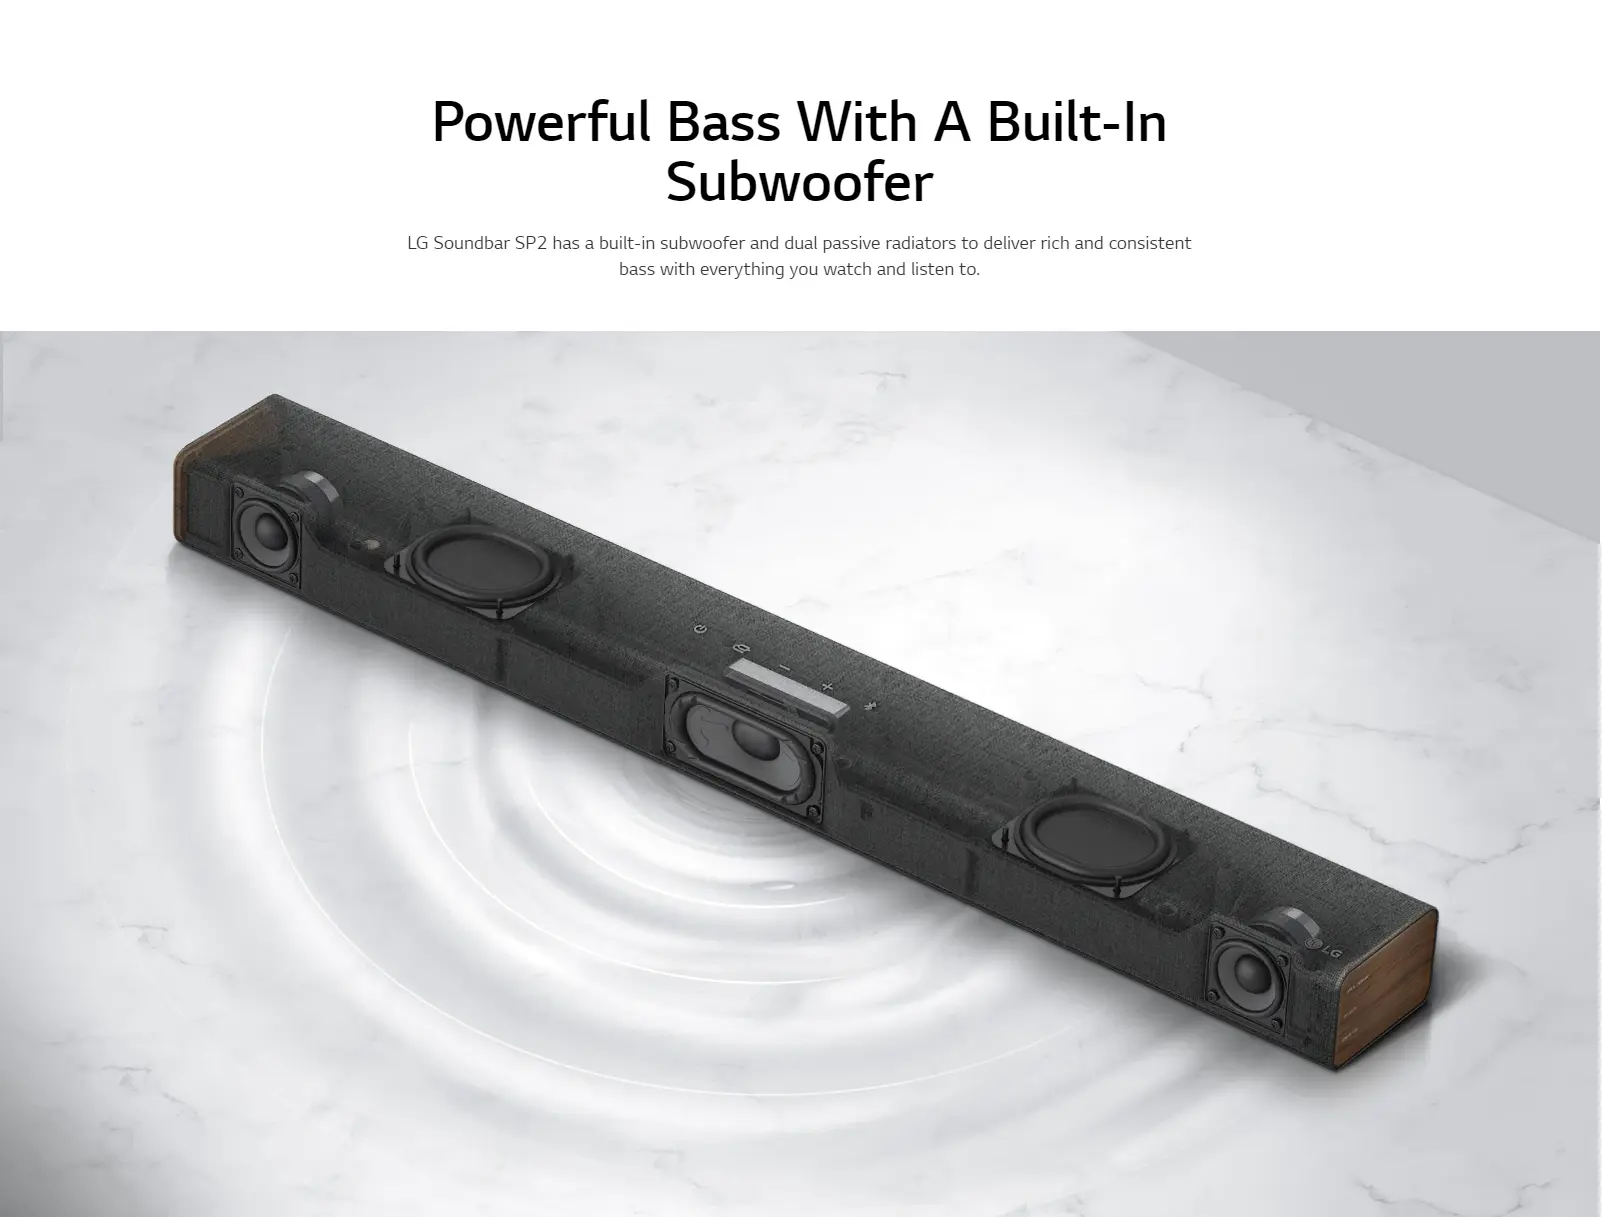 LG Soundbar Truly Immersive 2.1 Channel Sound, Powerful Bass With A Built-In Subwoofer